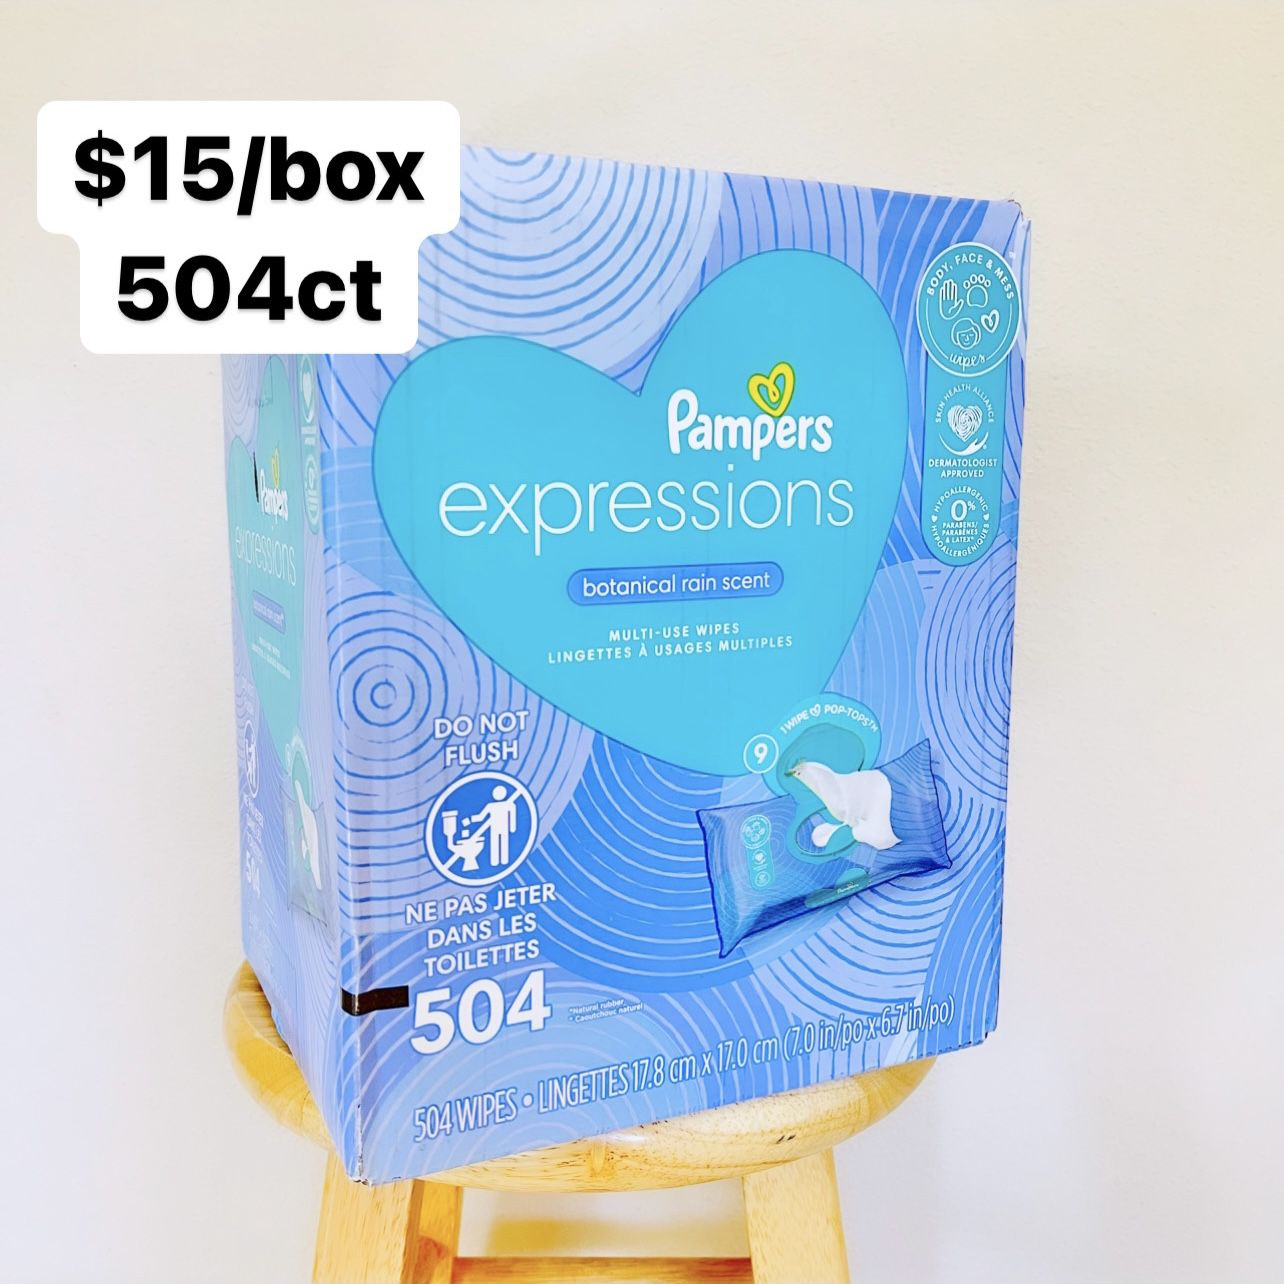 Pampers Expressions Botanical Rain Scented Baby Wipes (9 Packs Of 56ct, 504 Wipes Total)